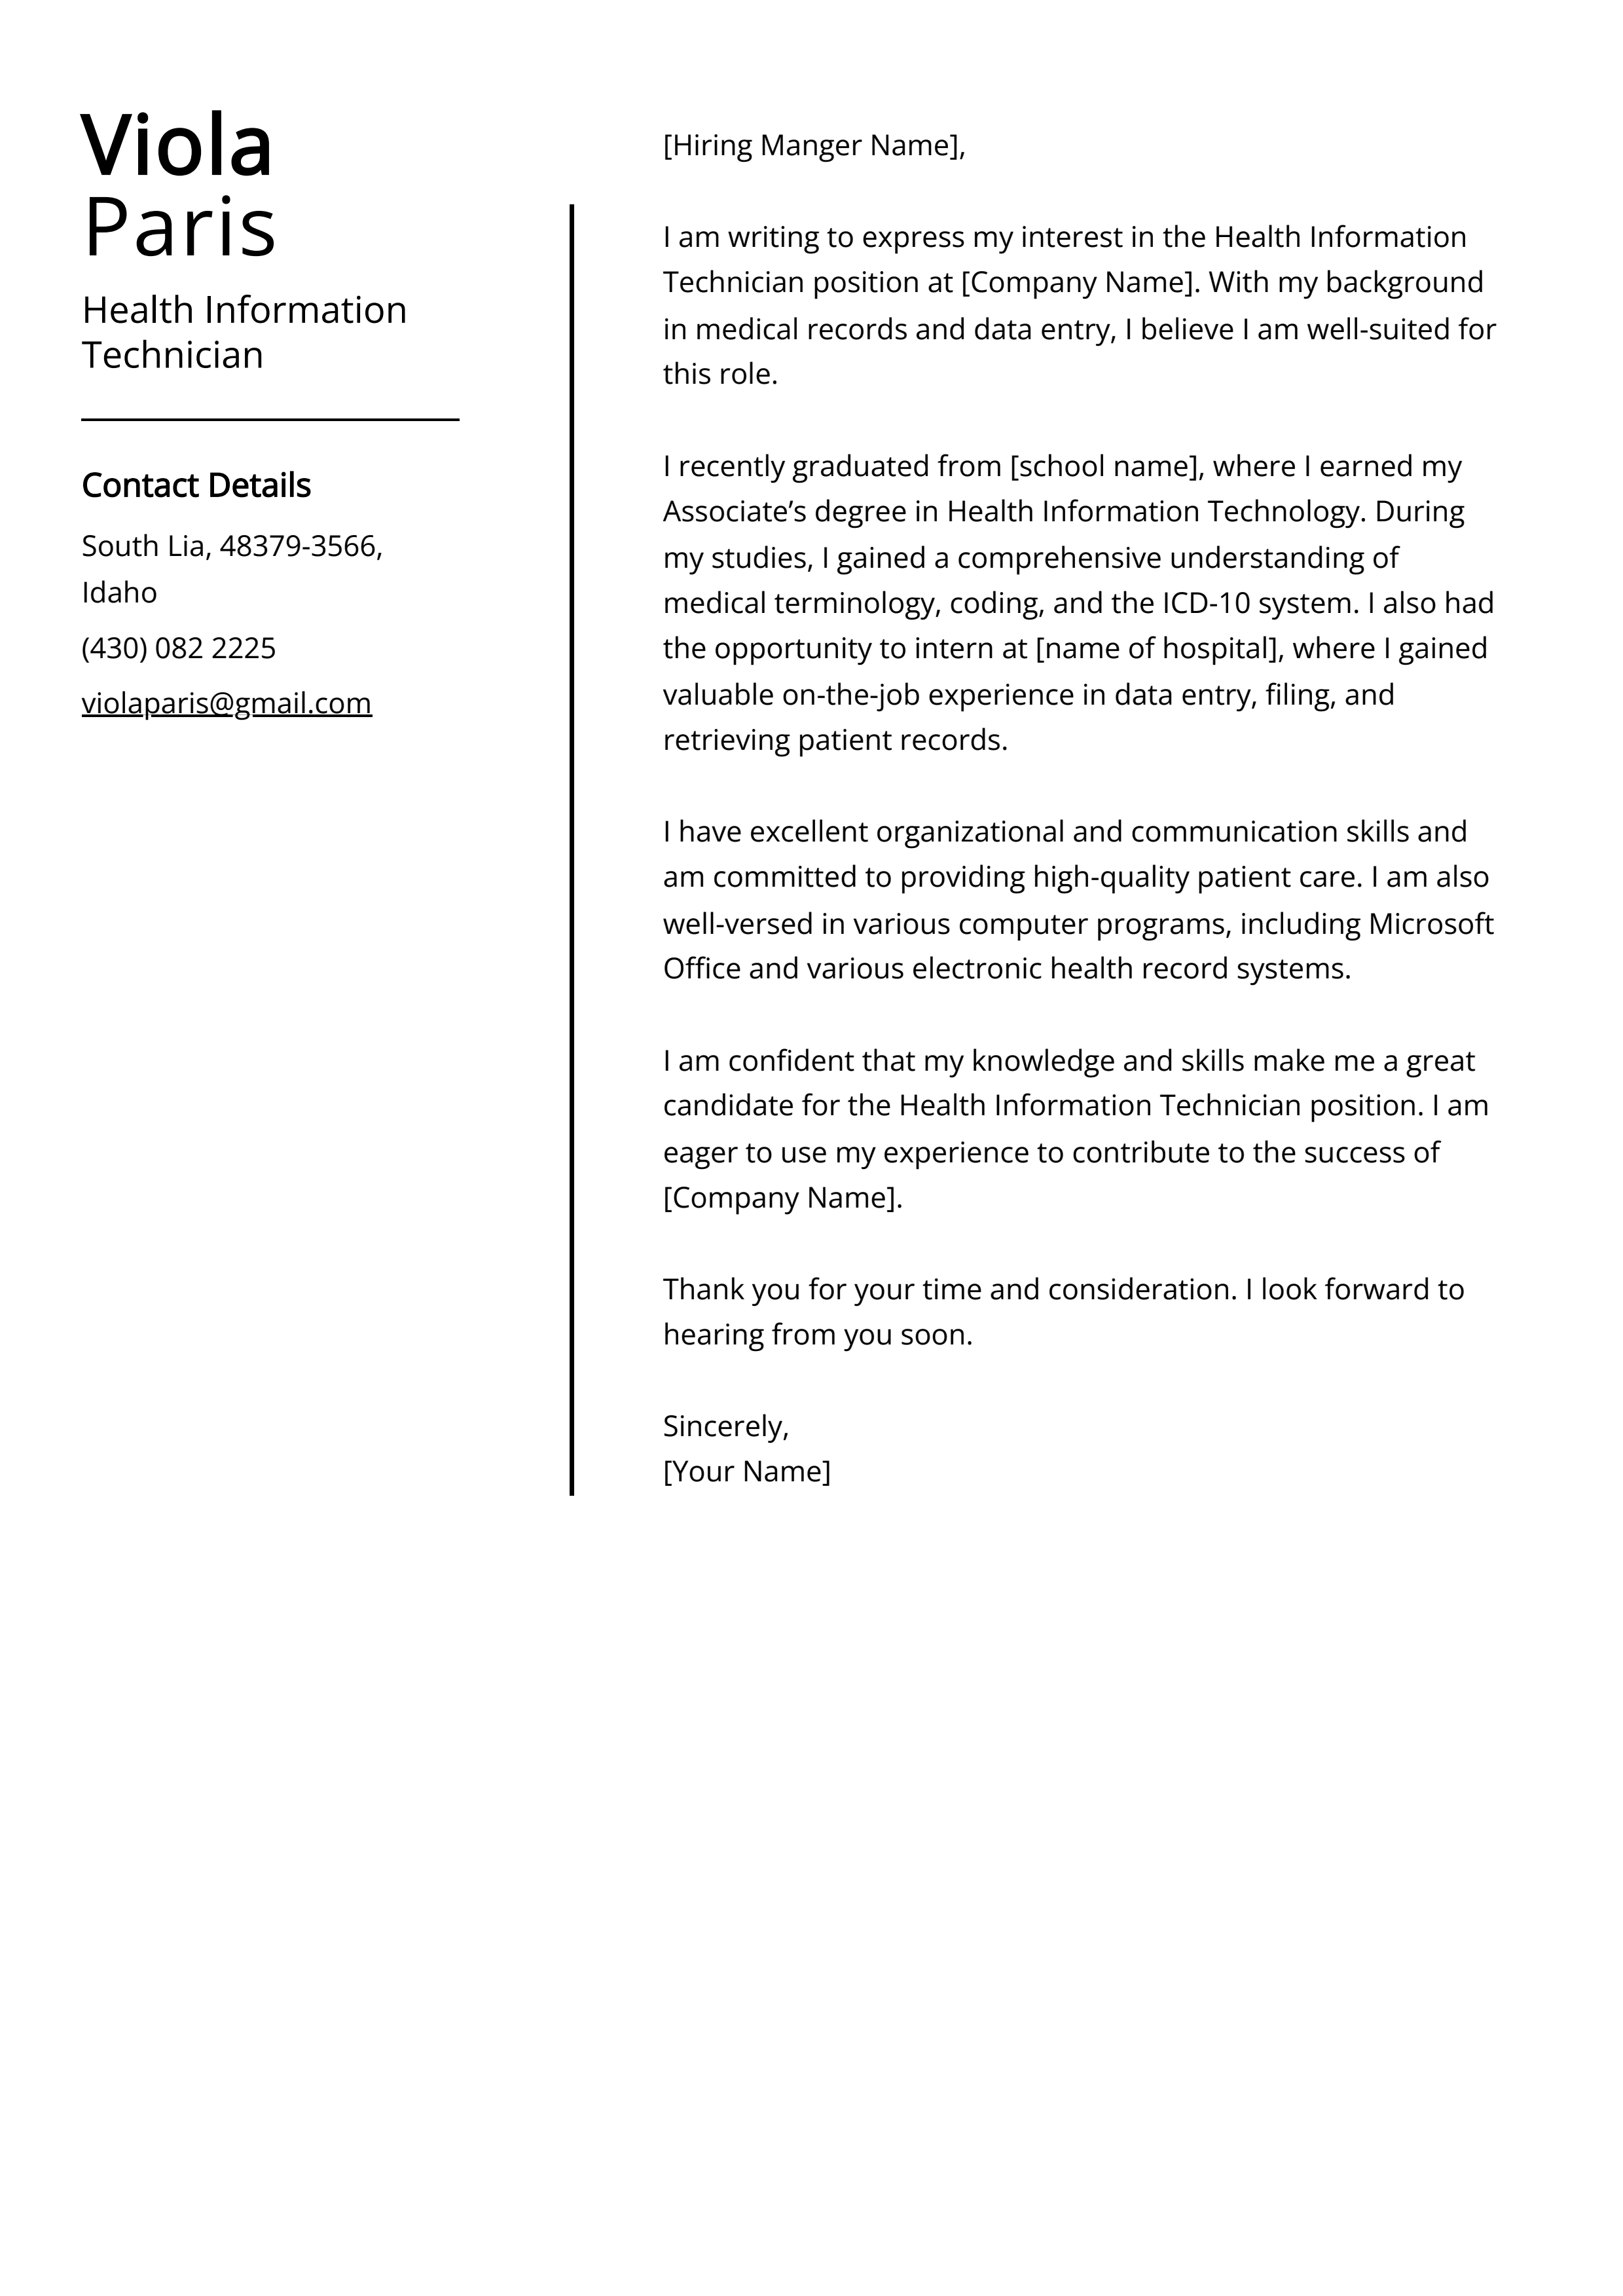 Health Information Technician Cover Letter Example